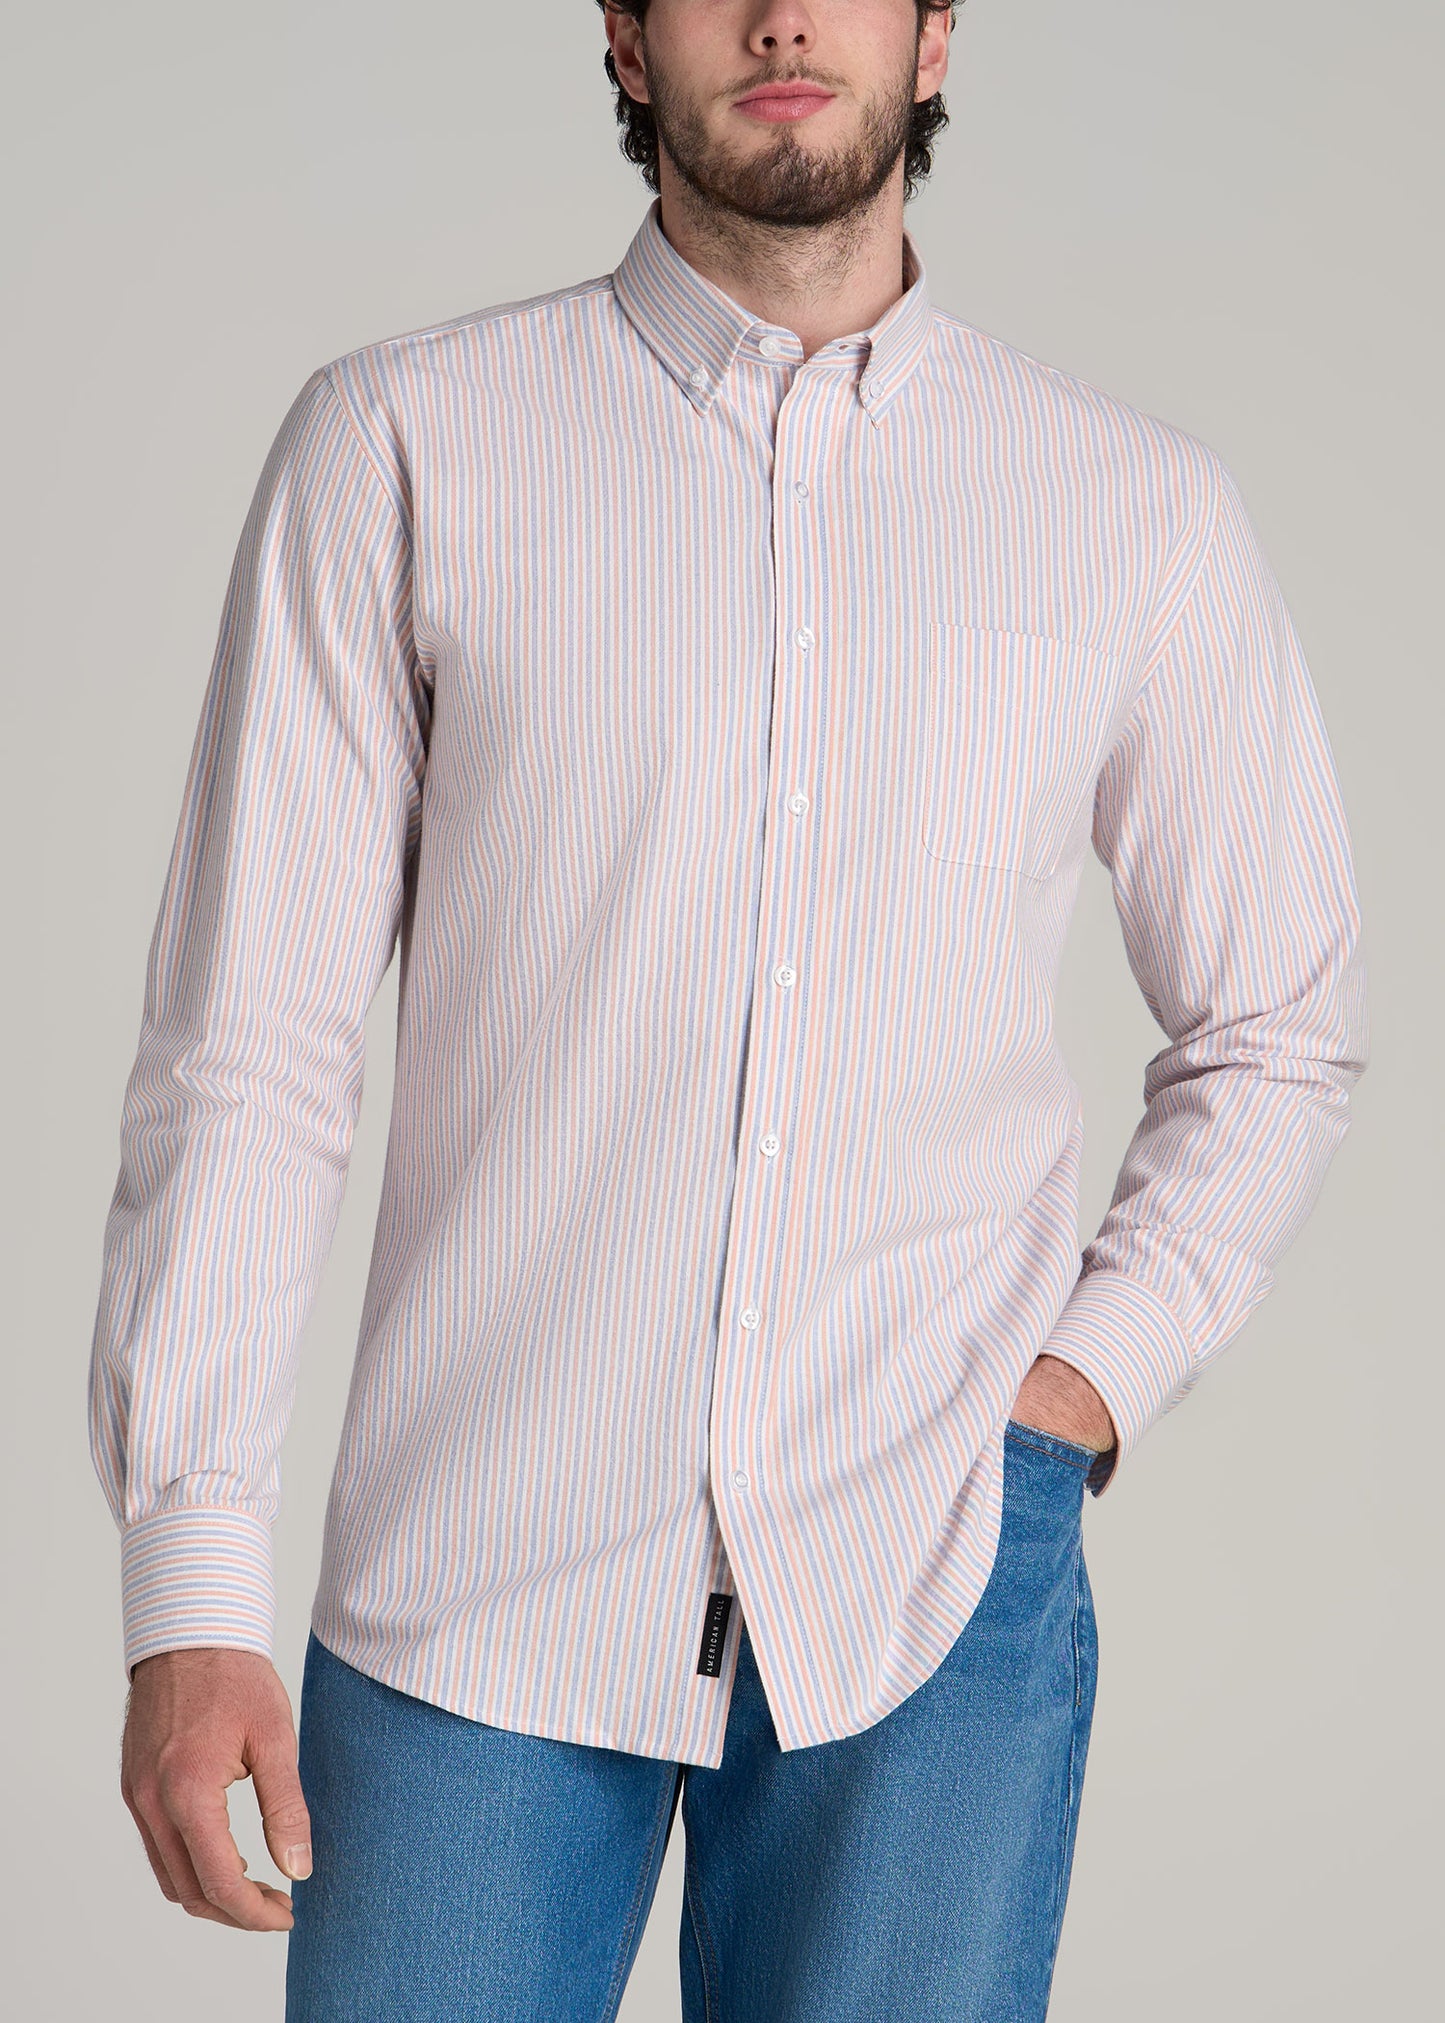 Washed Oxford Shirt for Tall Men in Apricot and Blue Multi Stripe